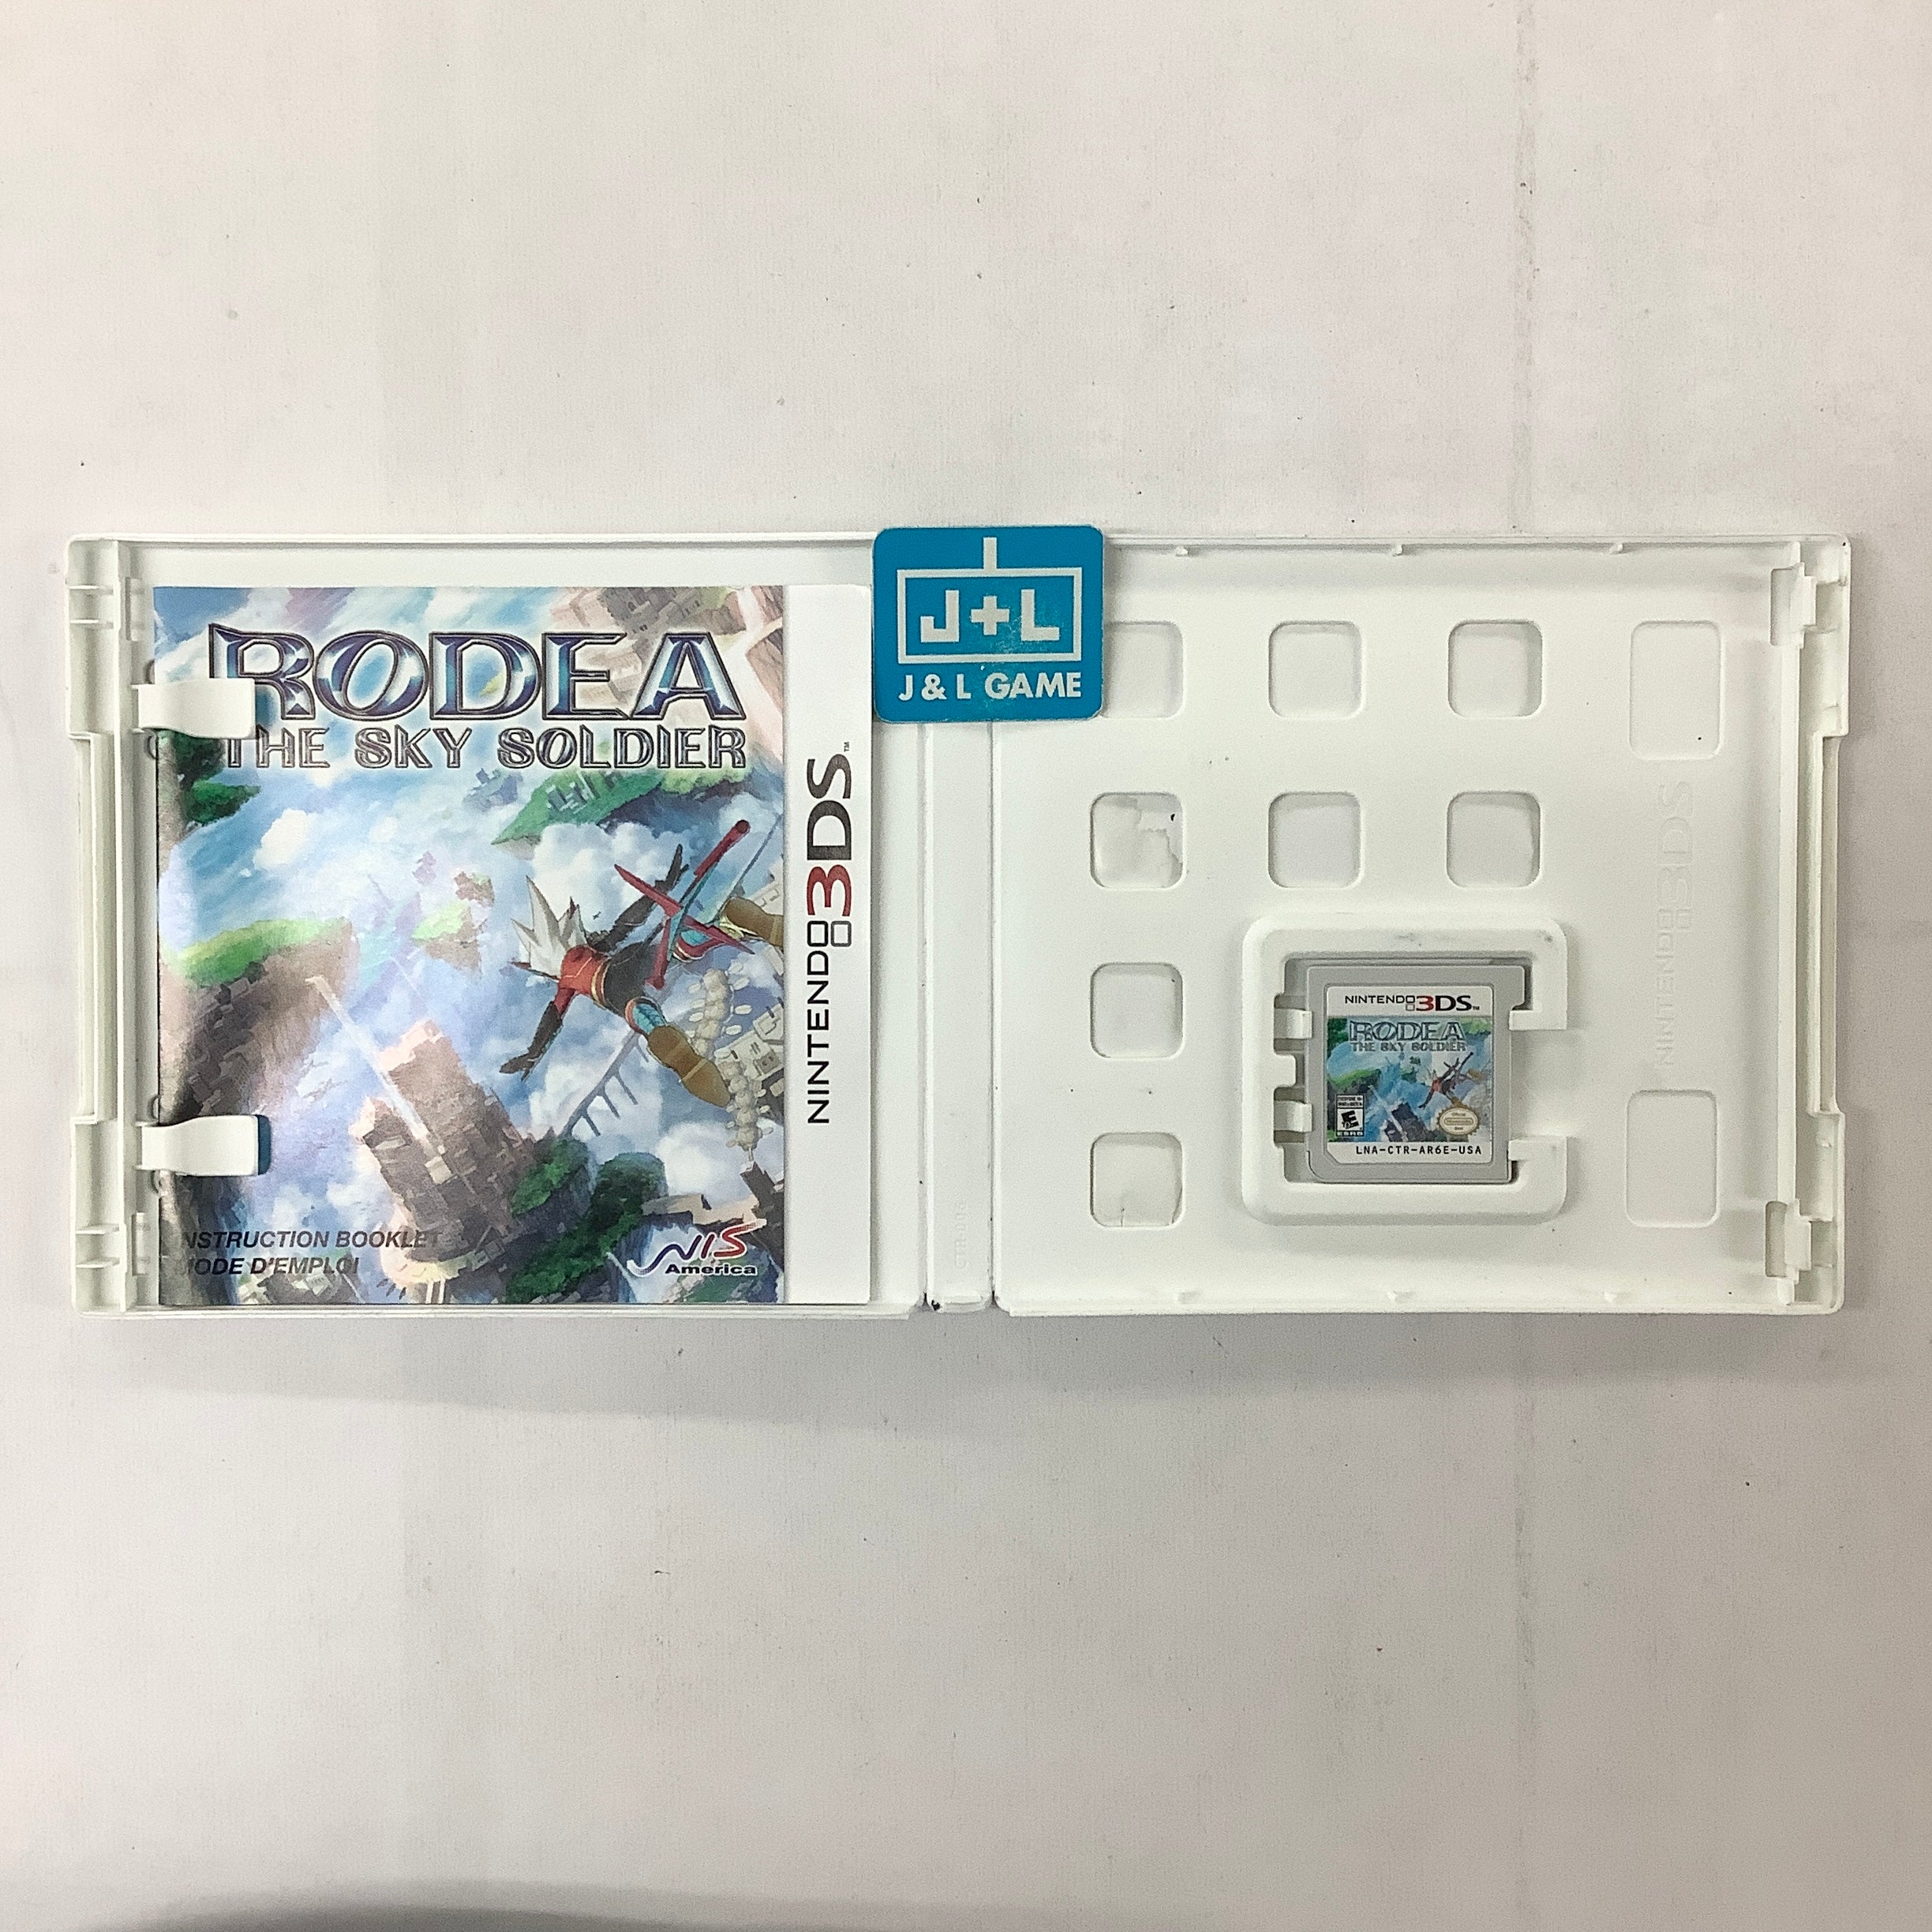 Rodea the Sky Soldier - Nintendo 3DS [Pre-Owned] Video Games NIS America   